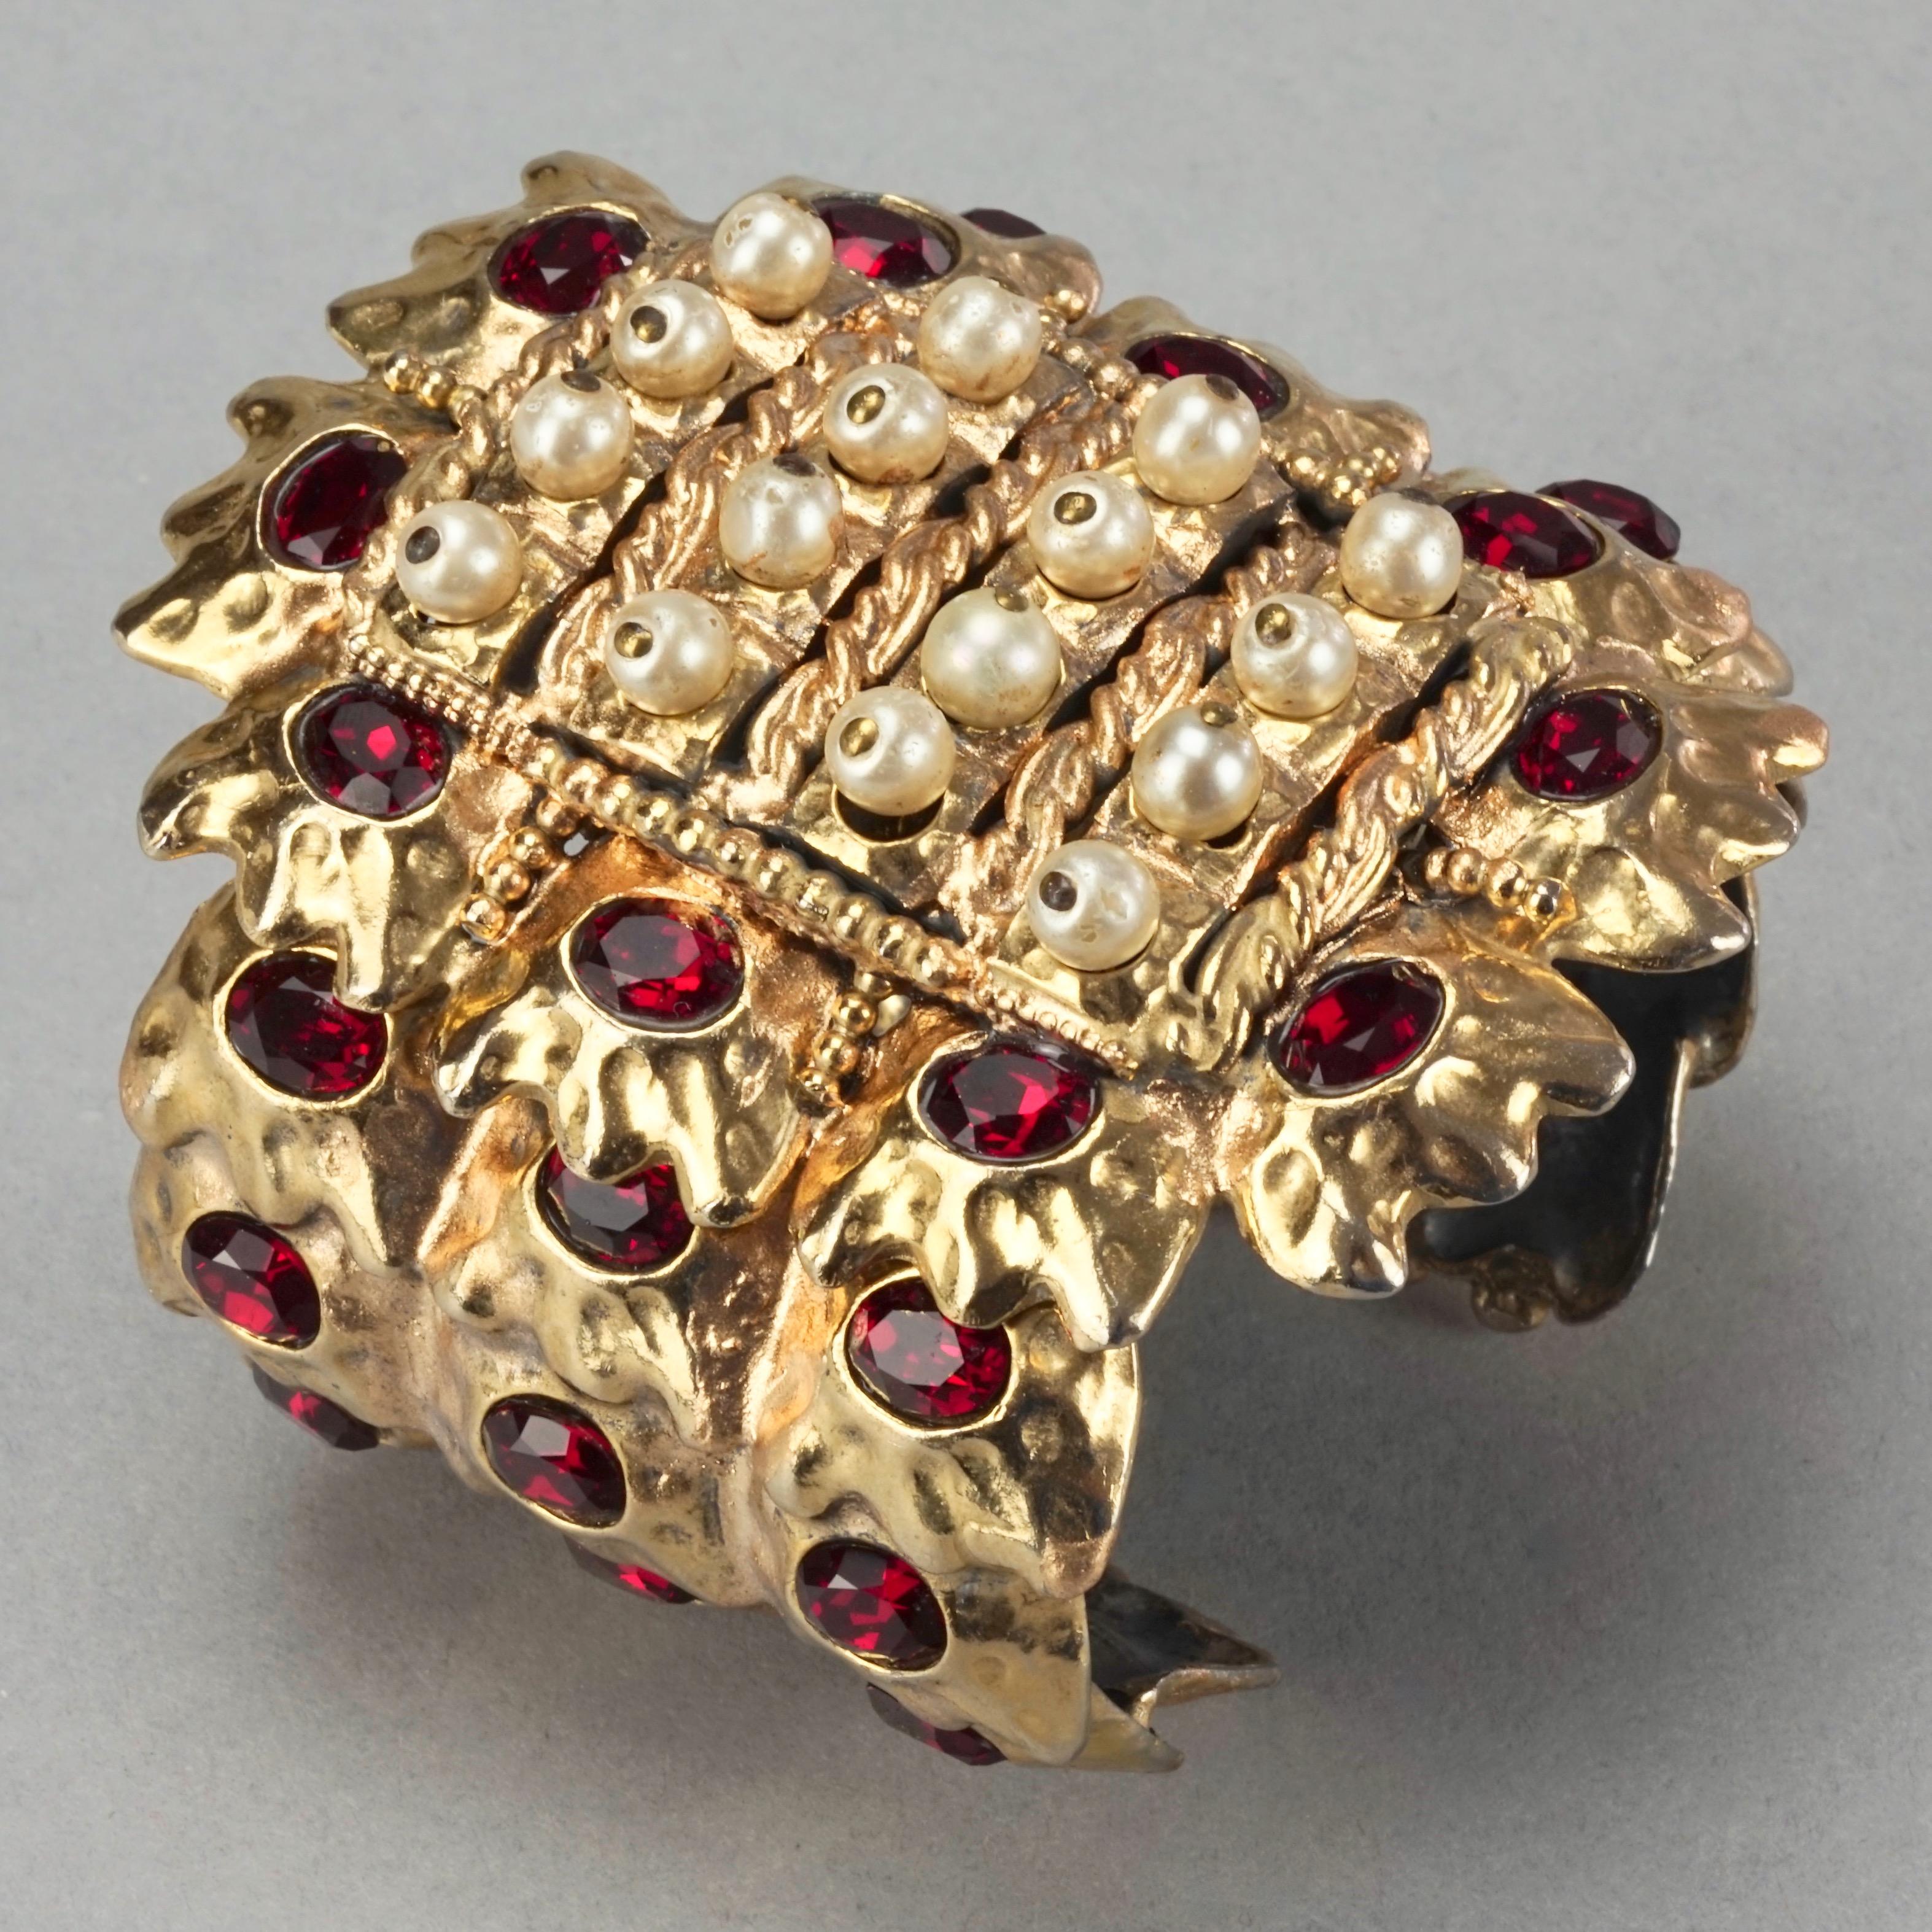 Vintage French Mogul Ruby Pearl Hammered Cuff Bracelet

Measurements:
Height: 3.22 inches (8.2 cm)
Inner Circumference: 6.92 inches (17.6 cm) opening included, slightly adjustable

Features:
- French hammered cuff bracelet embellished with ruby